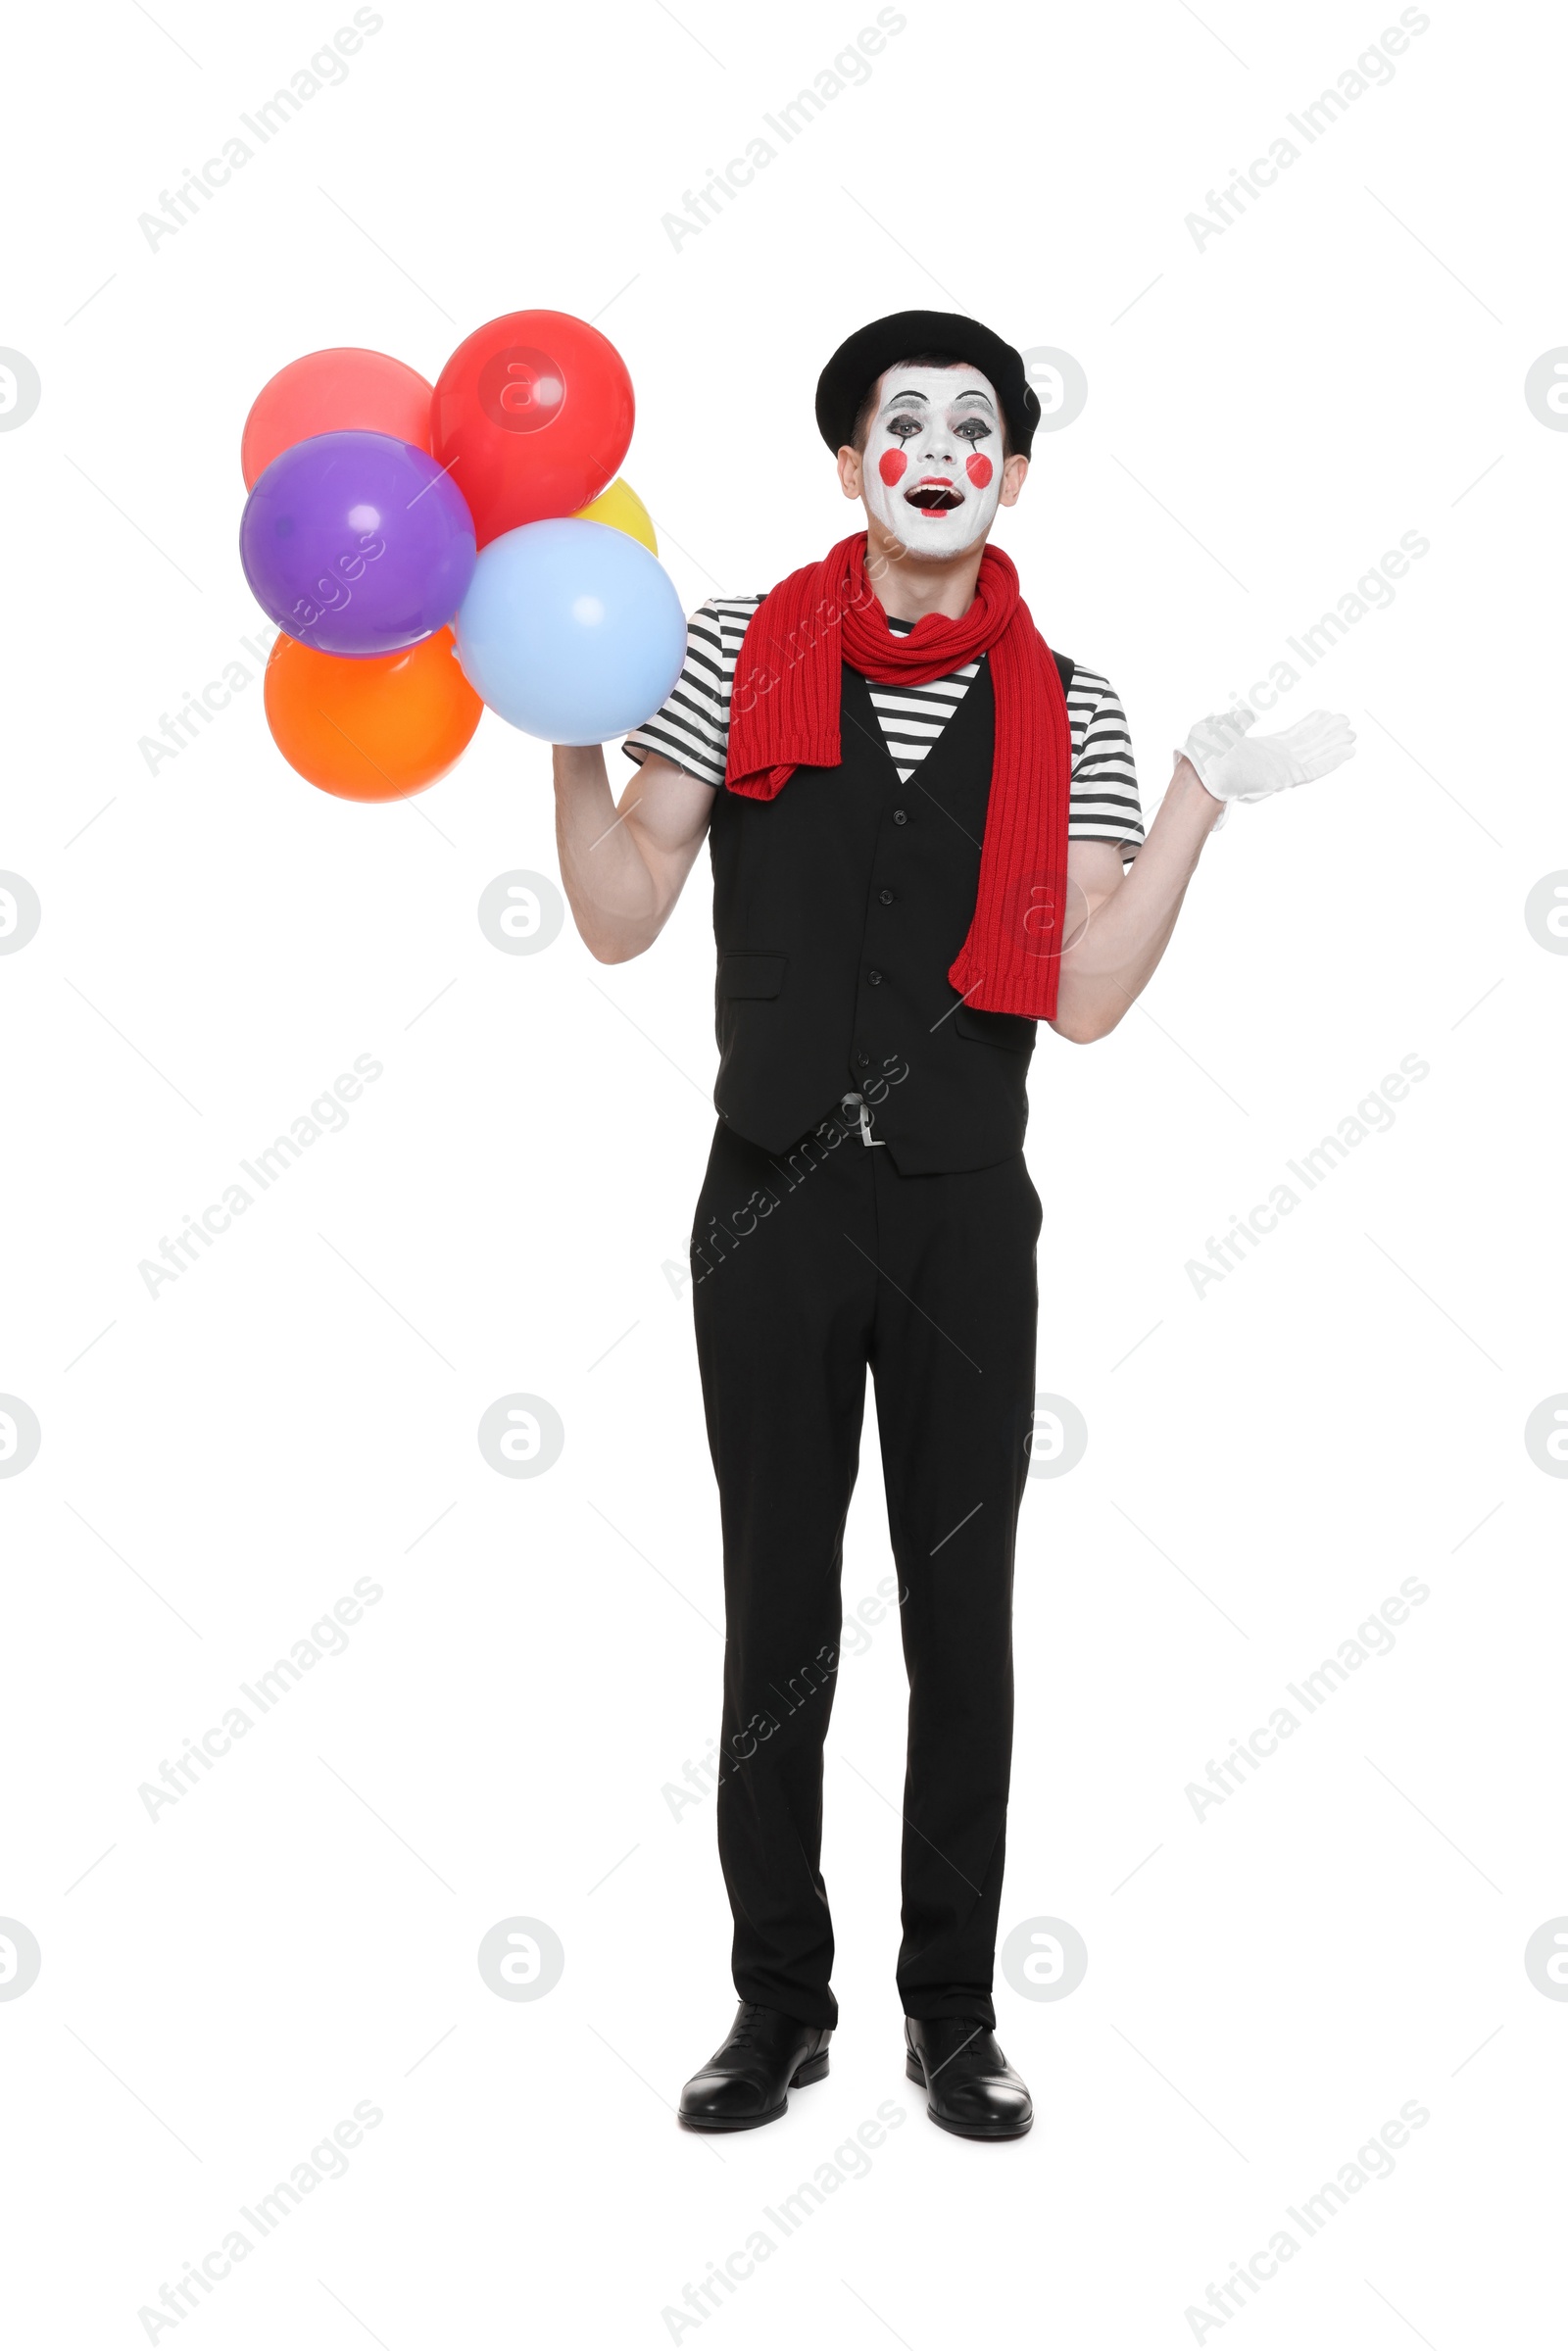 Photo of Funny mime artist with balloons posing on white background